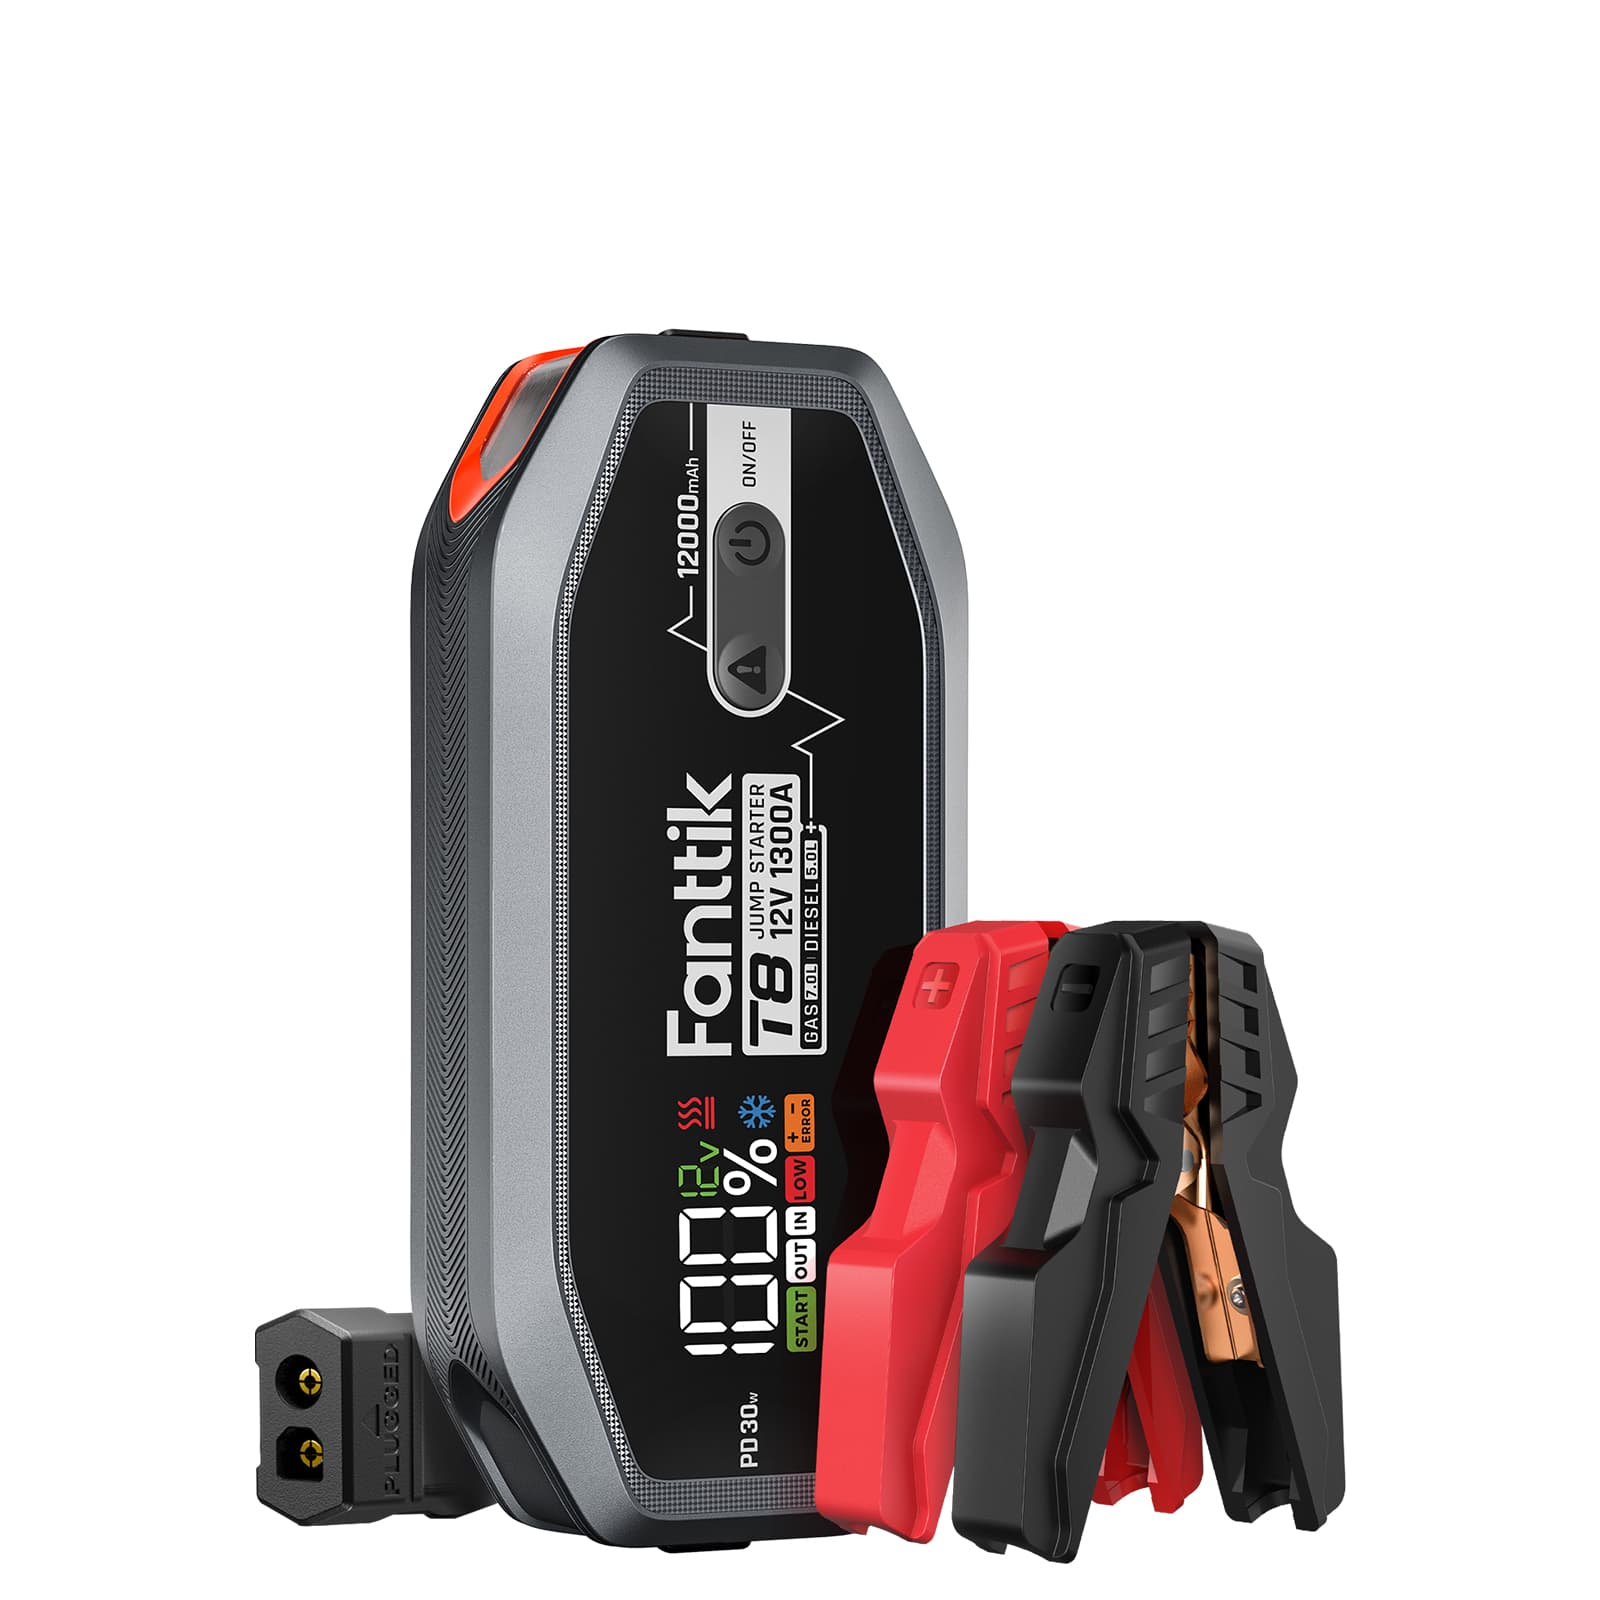 HULKMAN Alpha 85 Jump Starter 2000 Amp Portable Car Starter with LED  Display for up to 8.5L Gas and 6L Diesel Engines